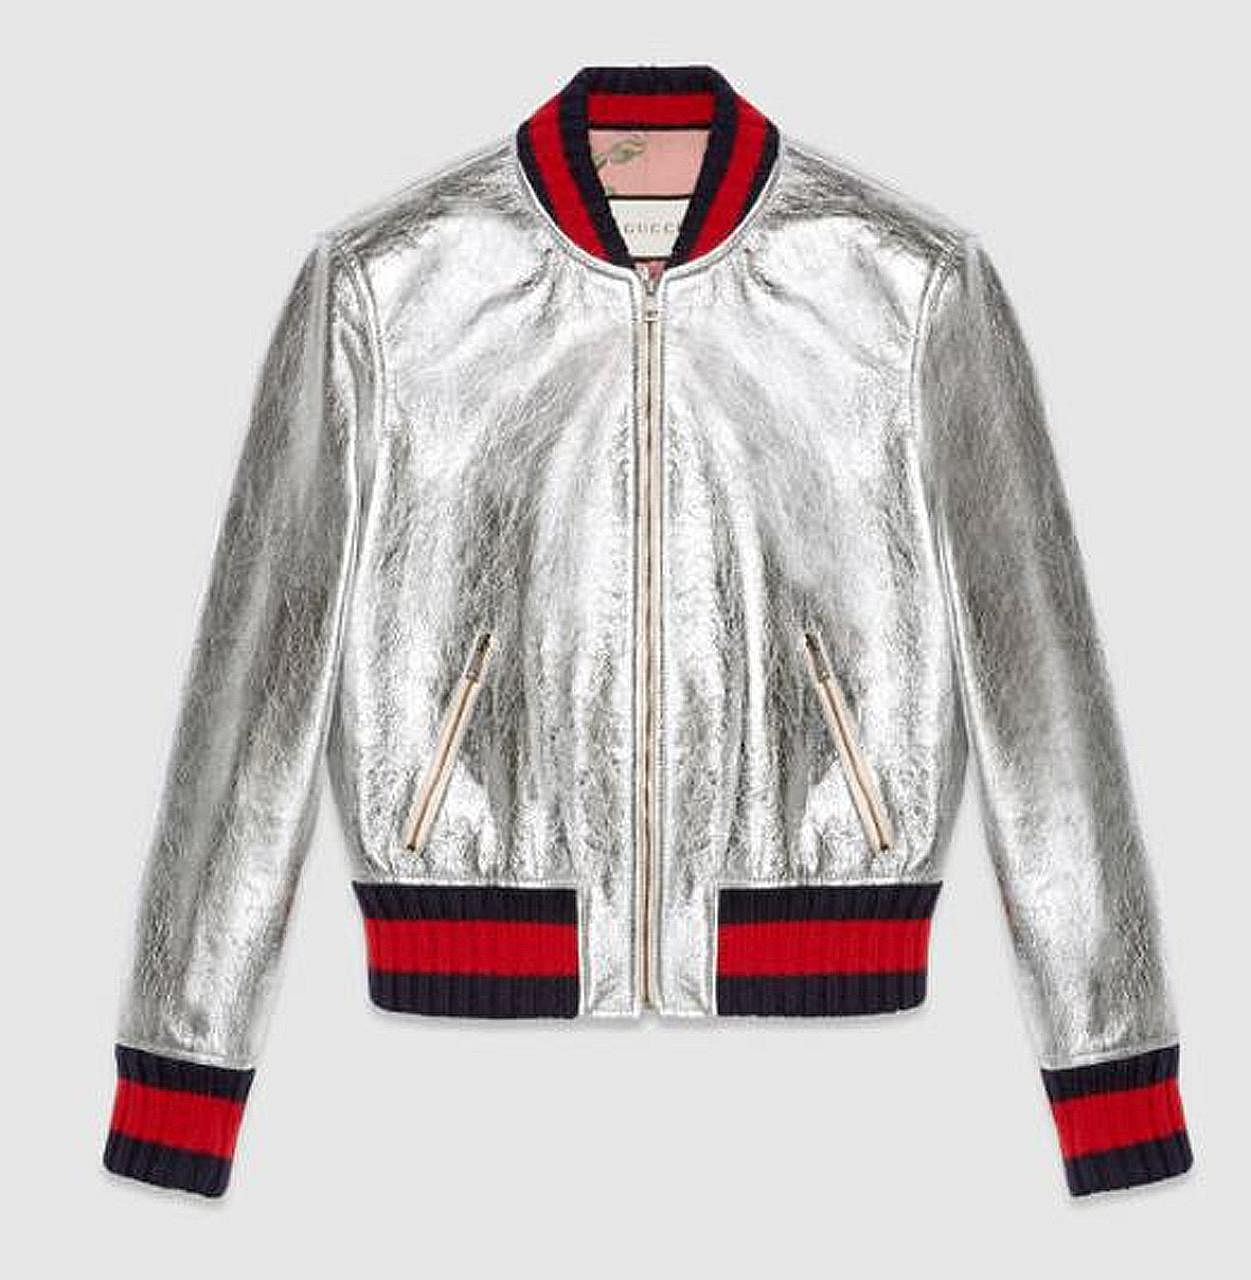 The Gucci leather bomber jacket at the centre of its suit against Forever 21.